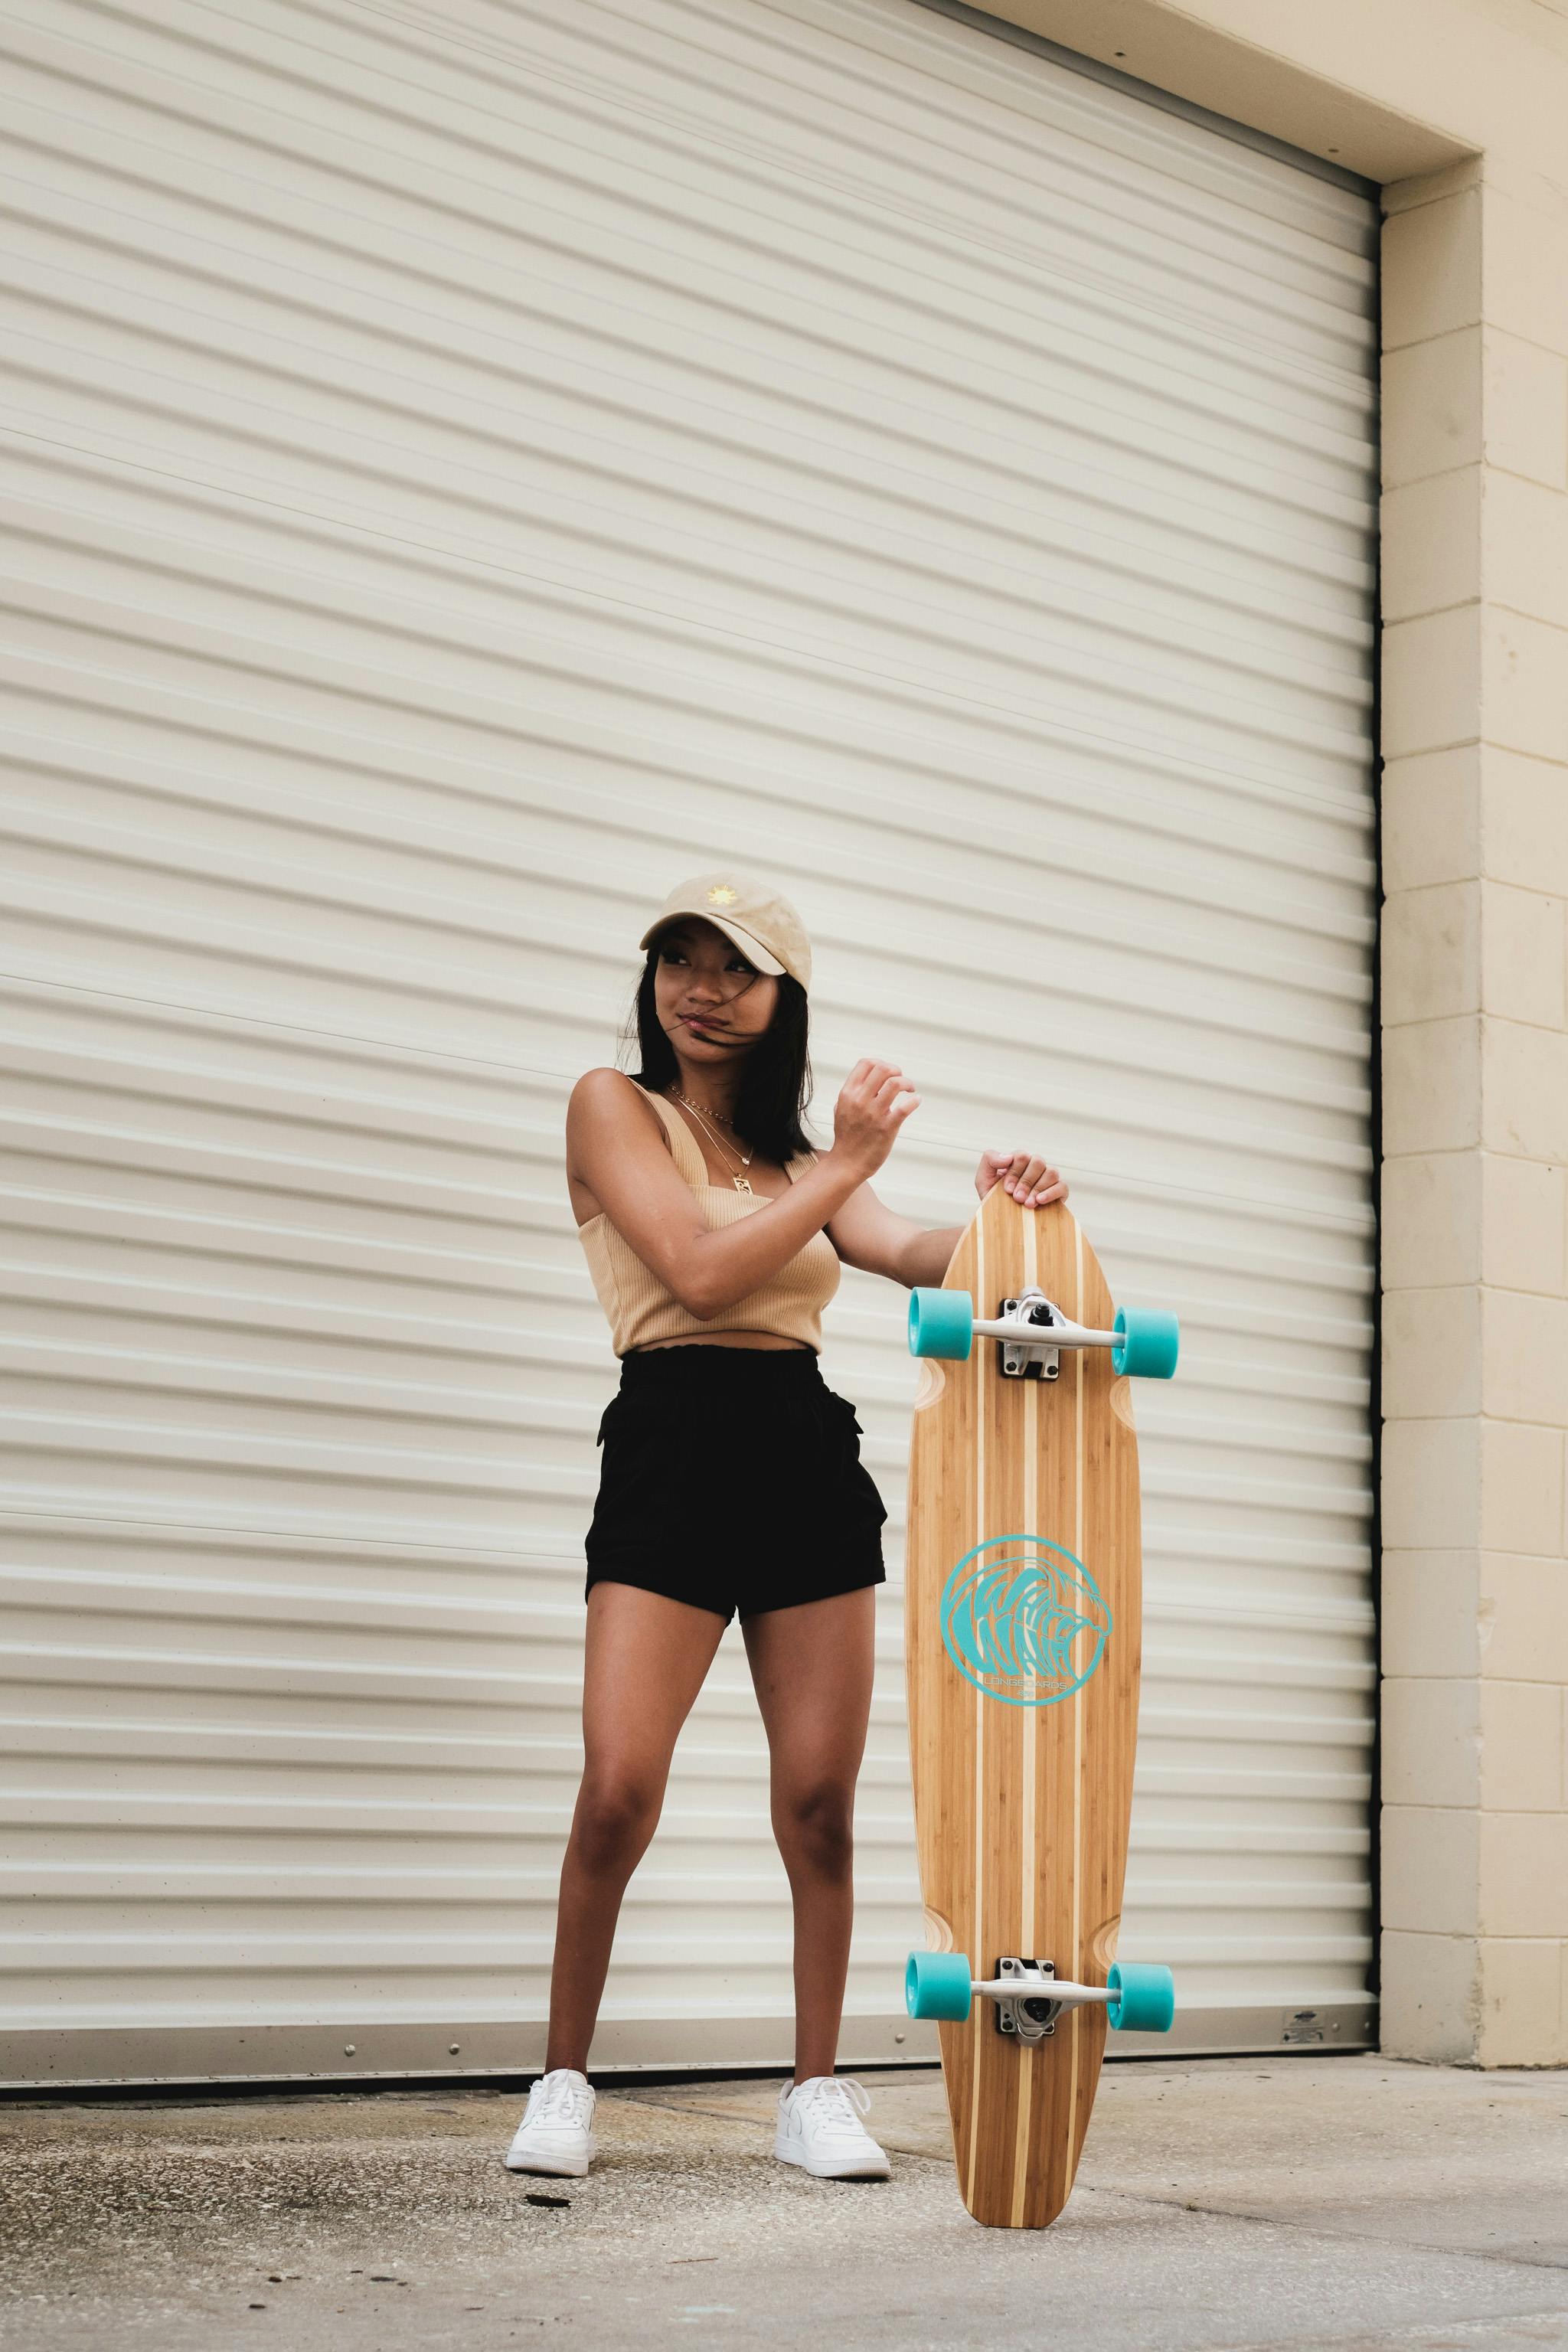 Skoleuddannelse Smelte hamburger A Woman Standing while Holding a Longboard · Free Stock Photo